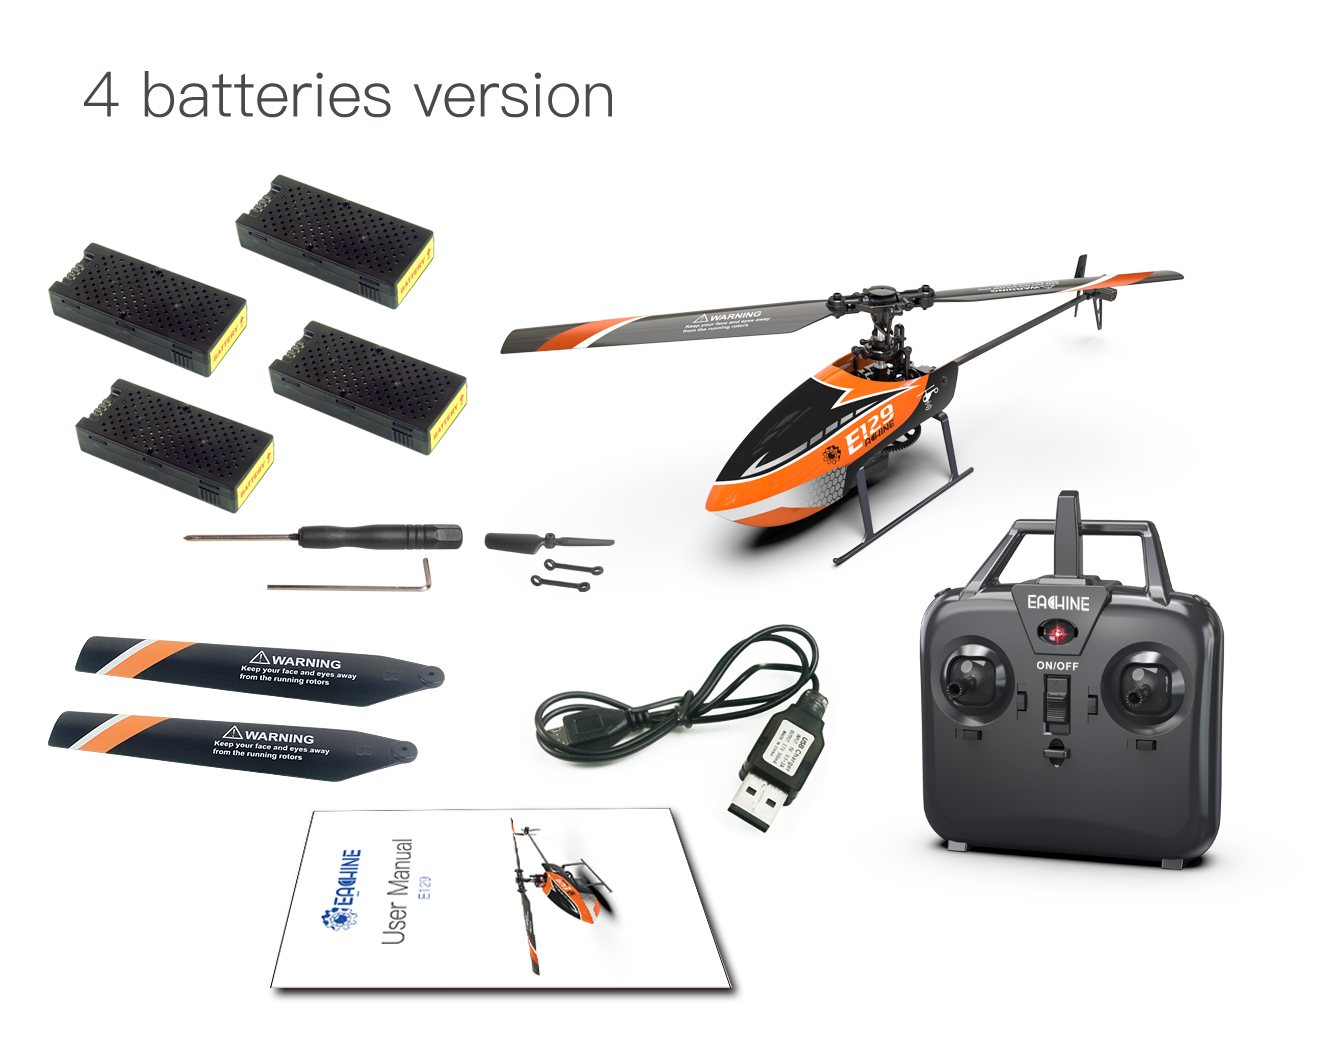 Eachine-E129-24G-4CH-6-Axis-Gyro-Altitude-Hold-Flybarless-RC-Helicopter-RTF-1738482-18